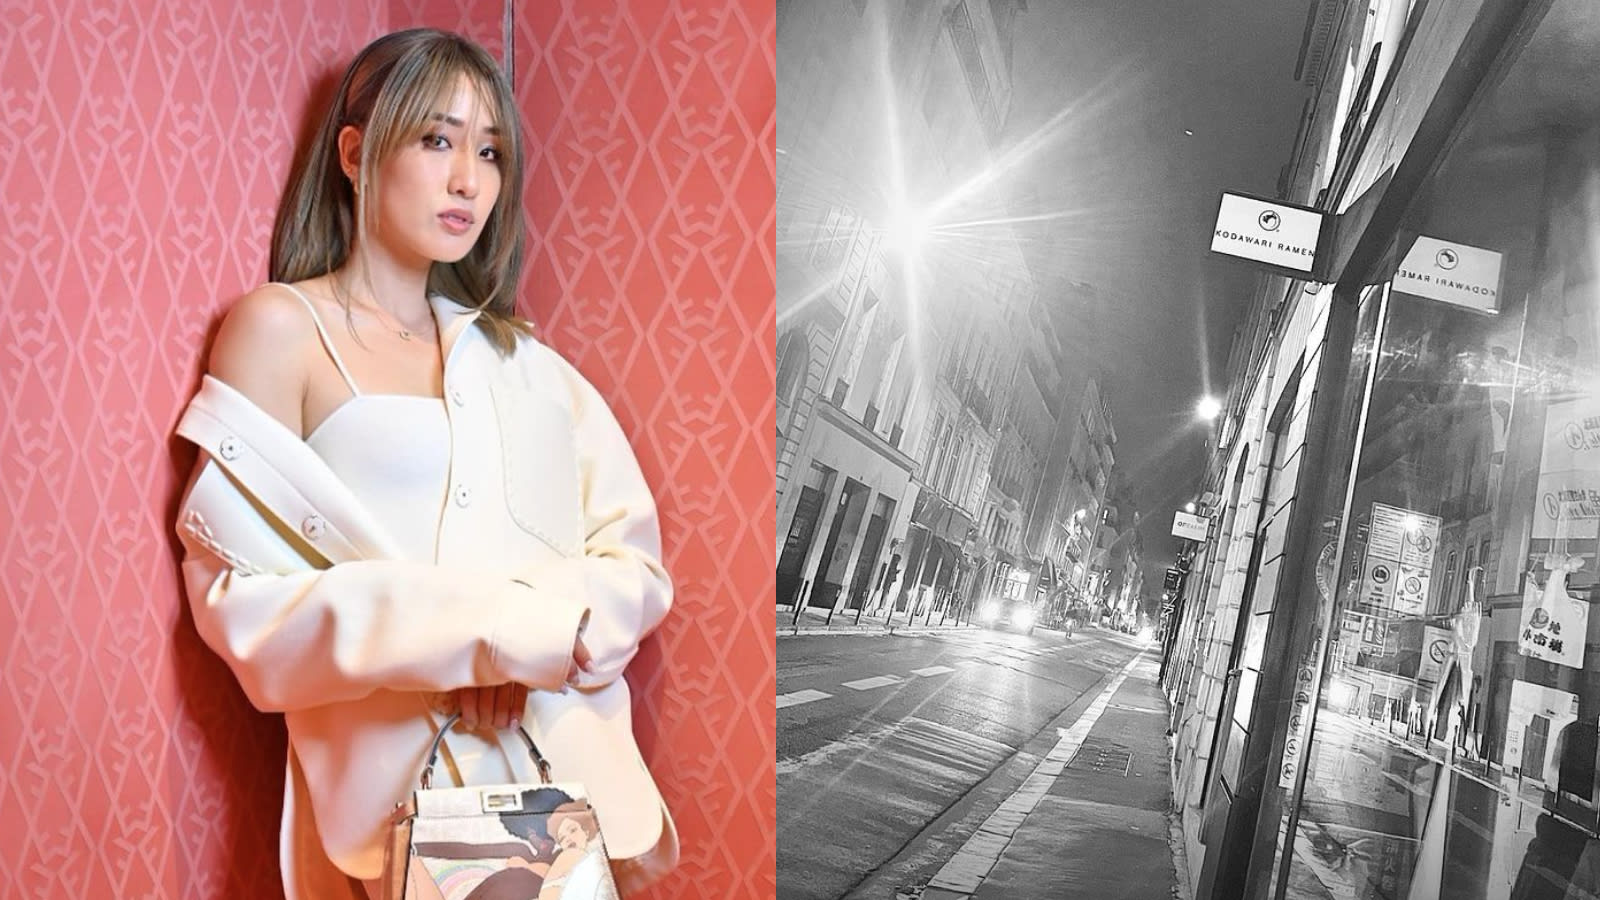 987 DJ Kimberly Wang Ran Into Scammers In Paris & This Is How She Dealt With It